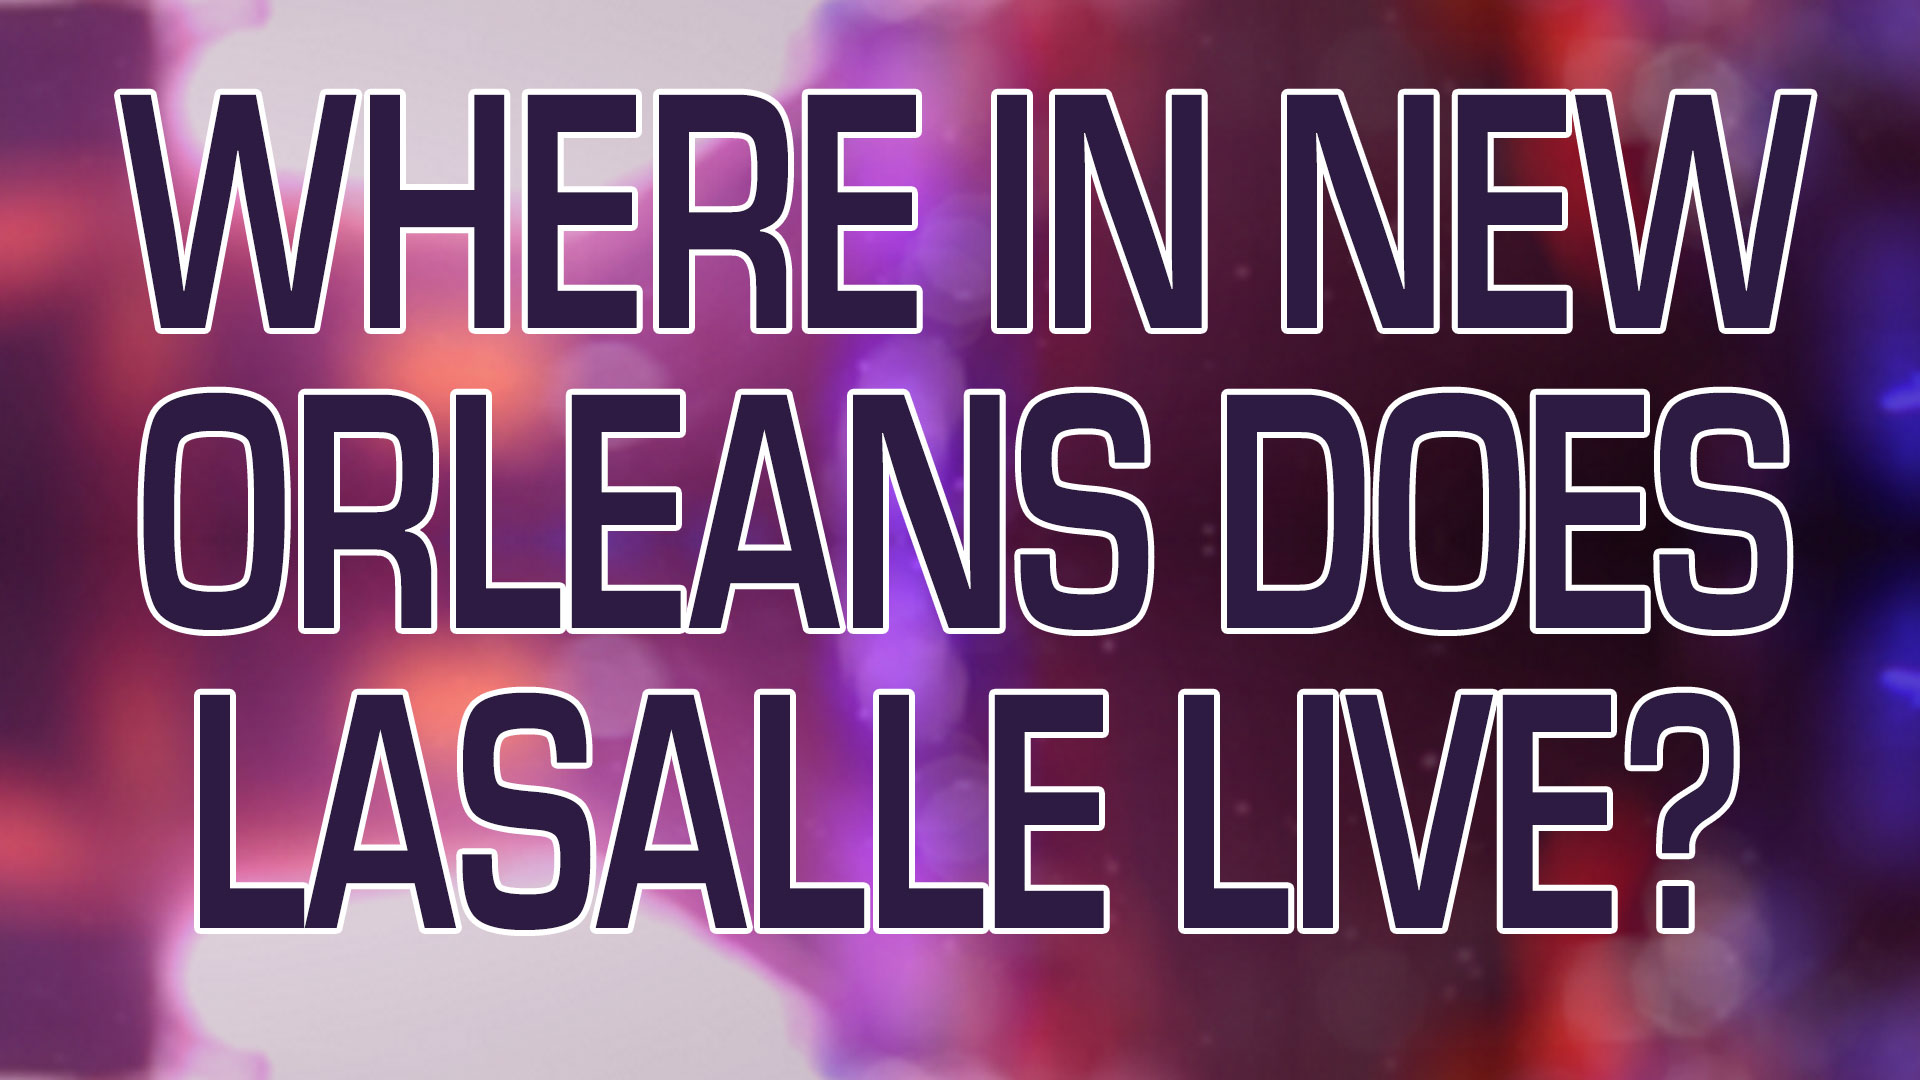 Where in New Orleans does Lasalle live?